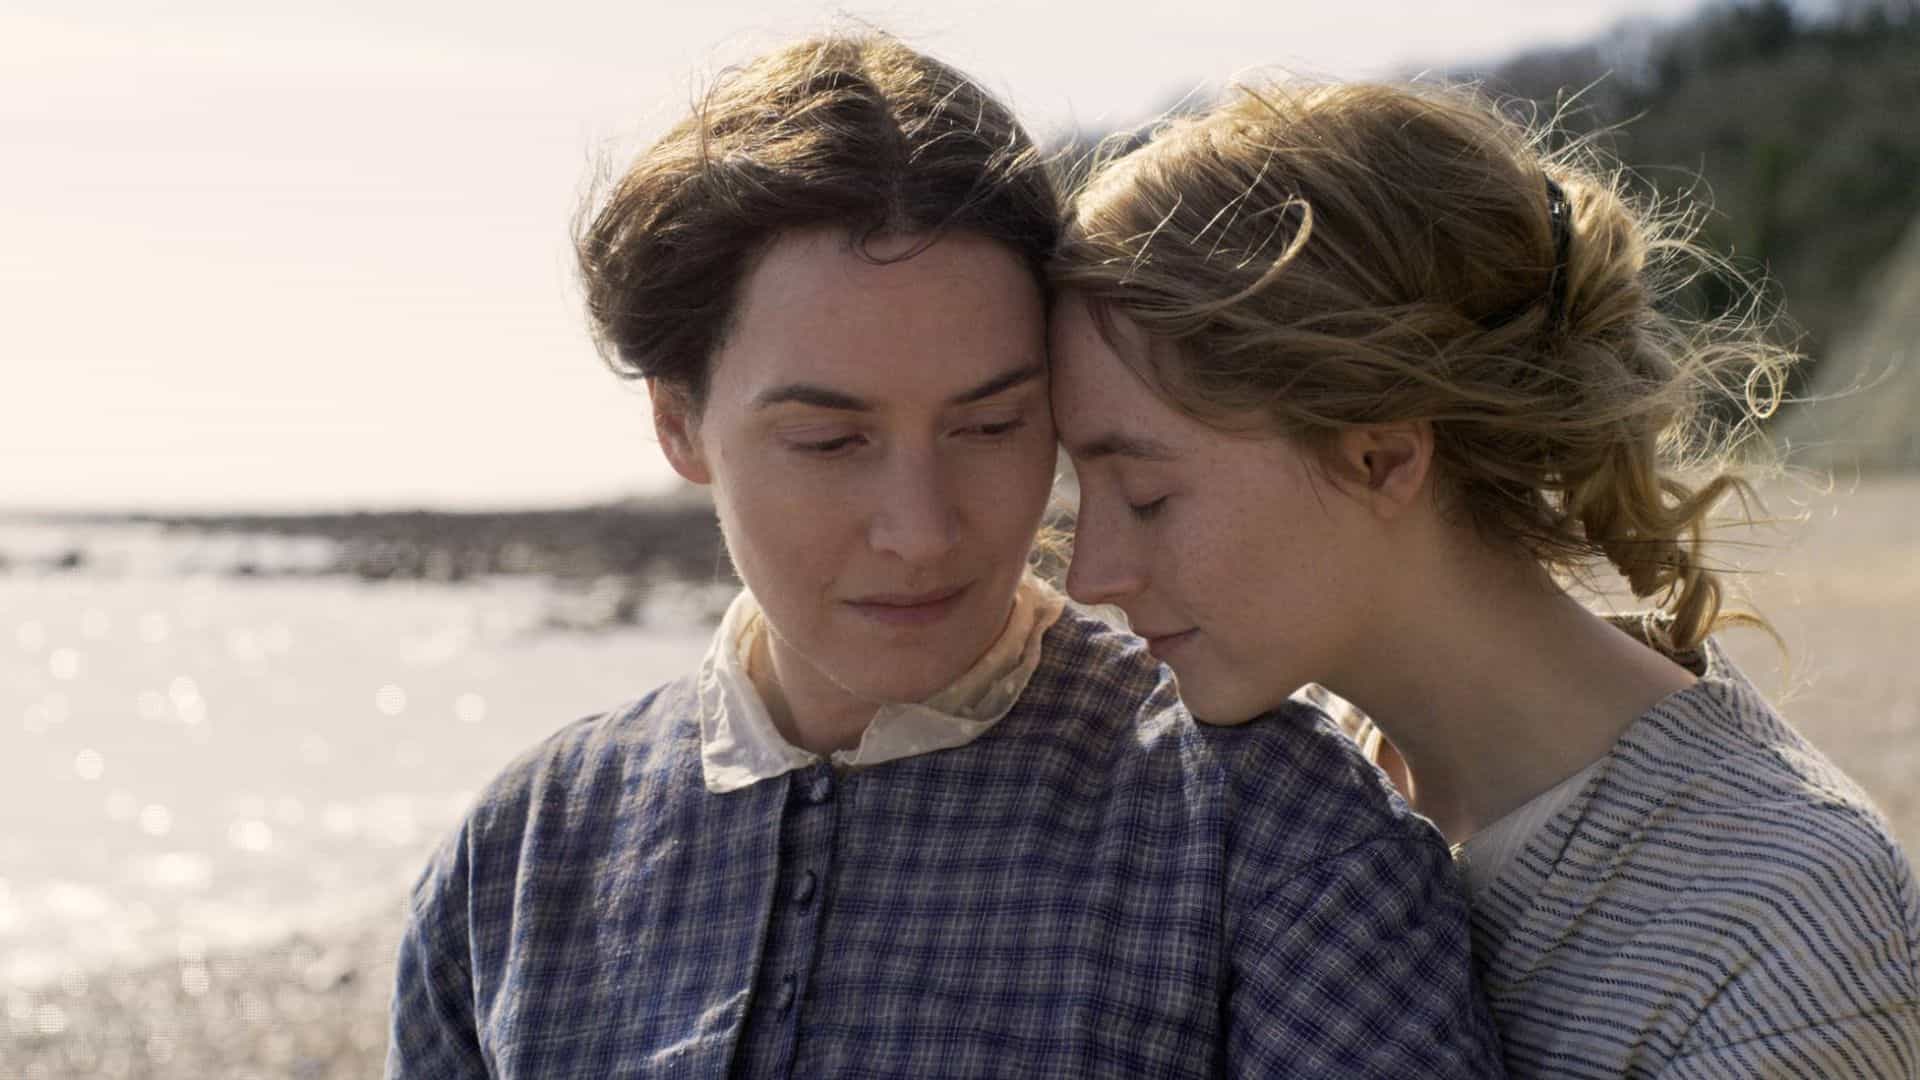 A woman rests her chin on another woman’s shoulder while on the beach in this image from BBC Film.